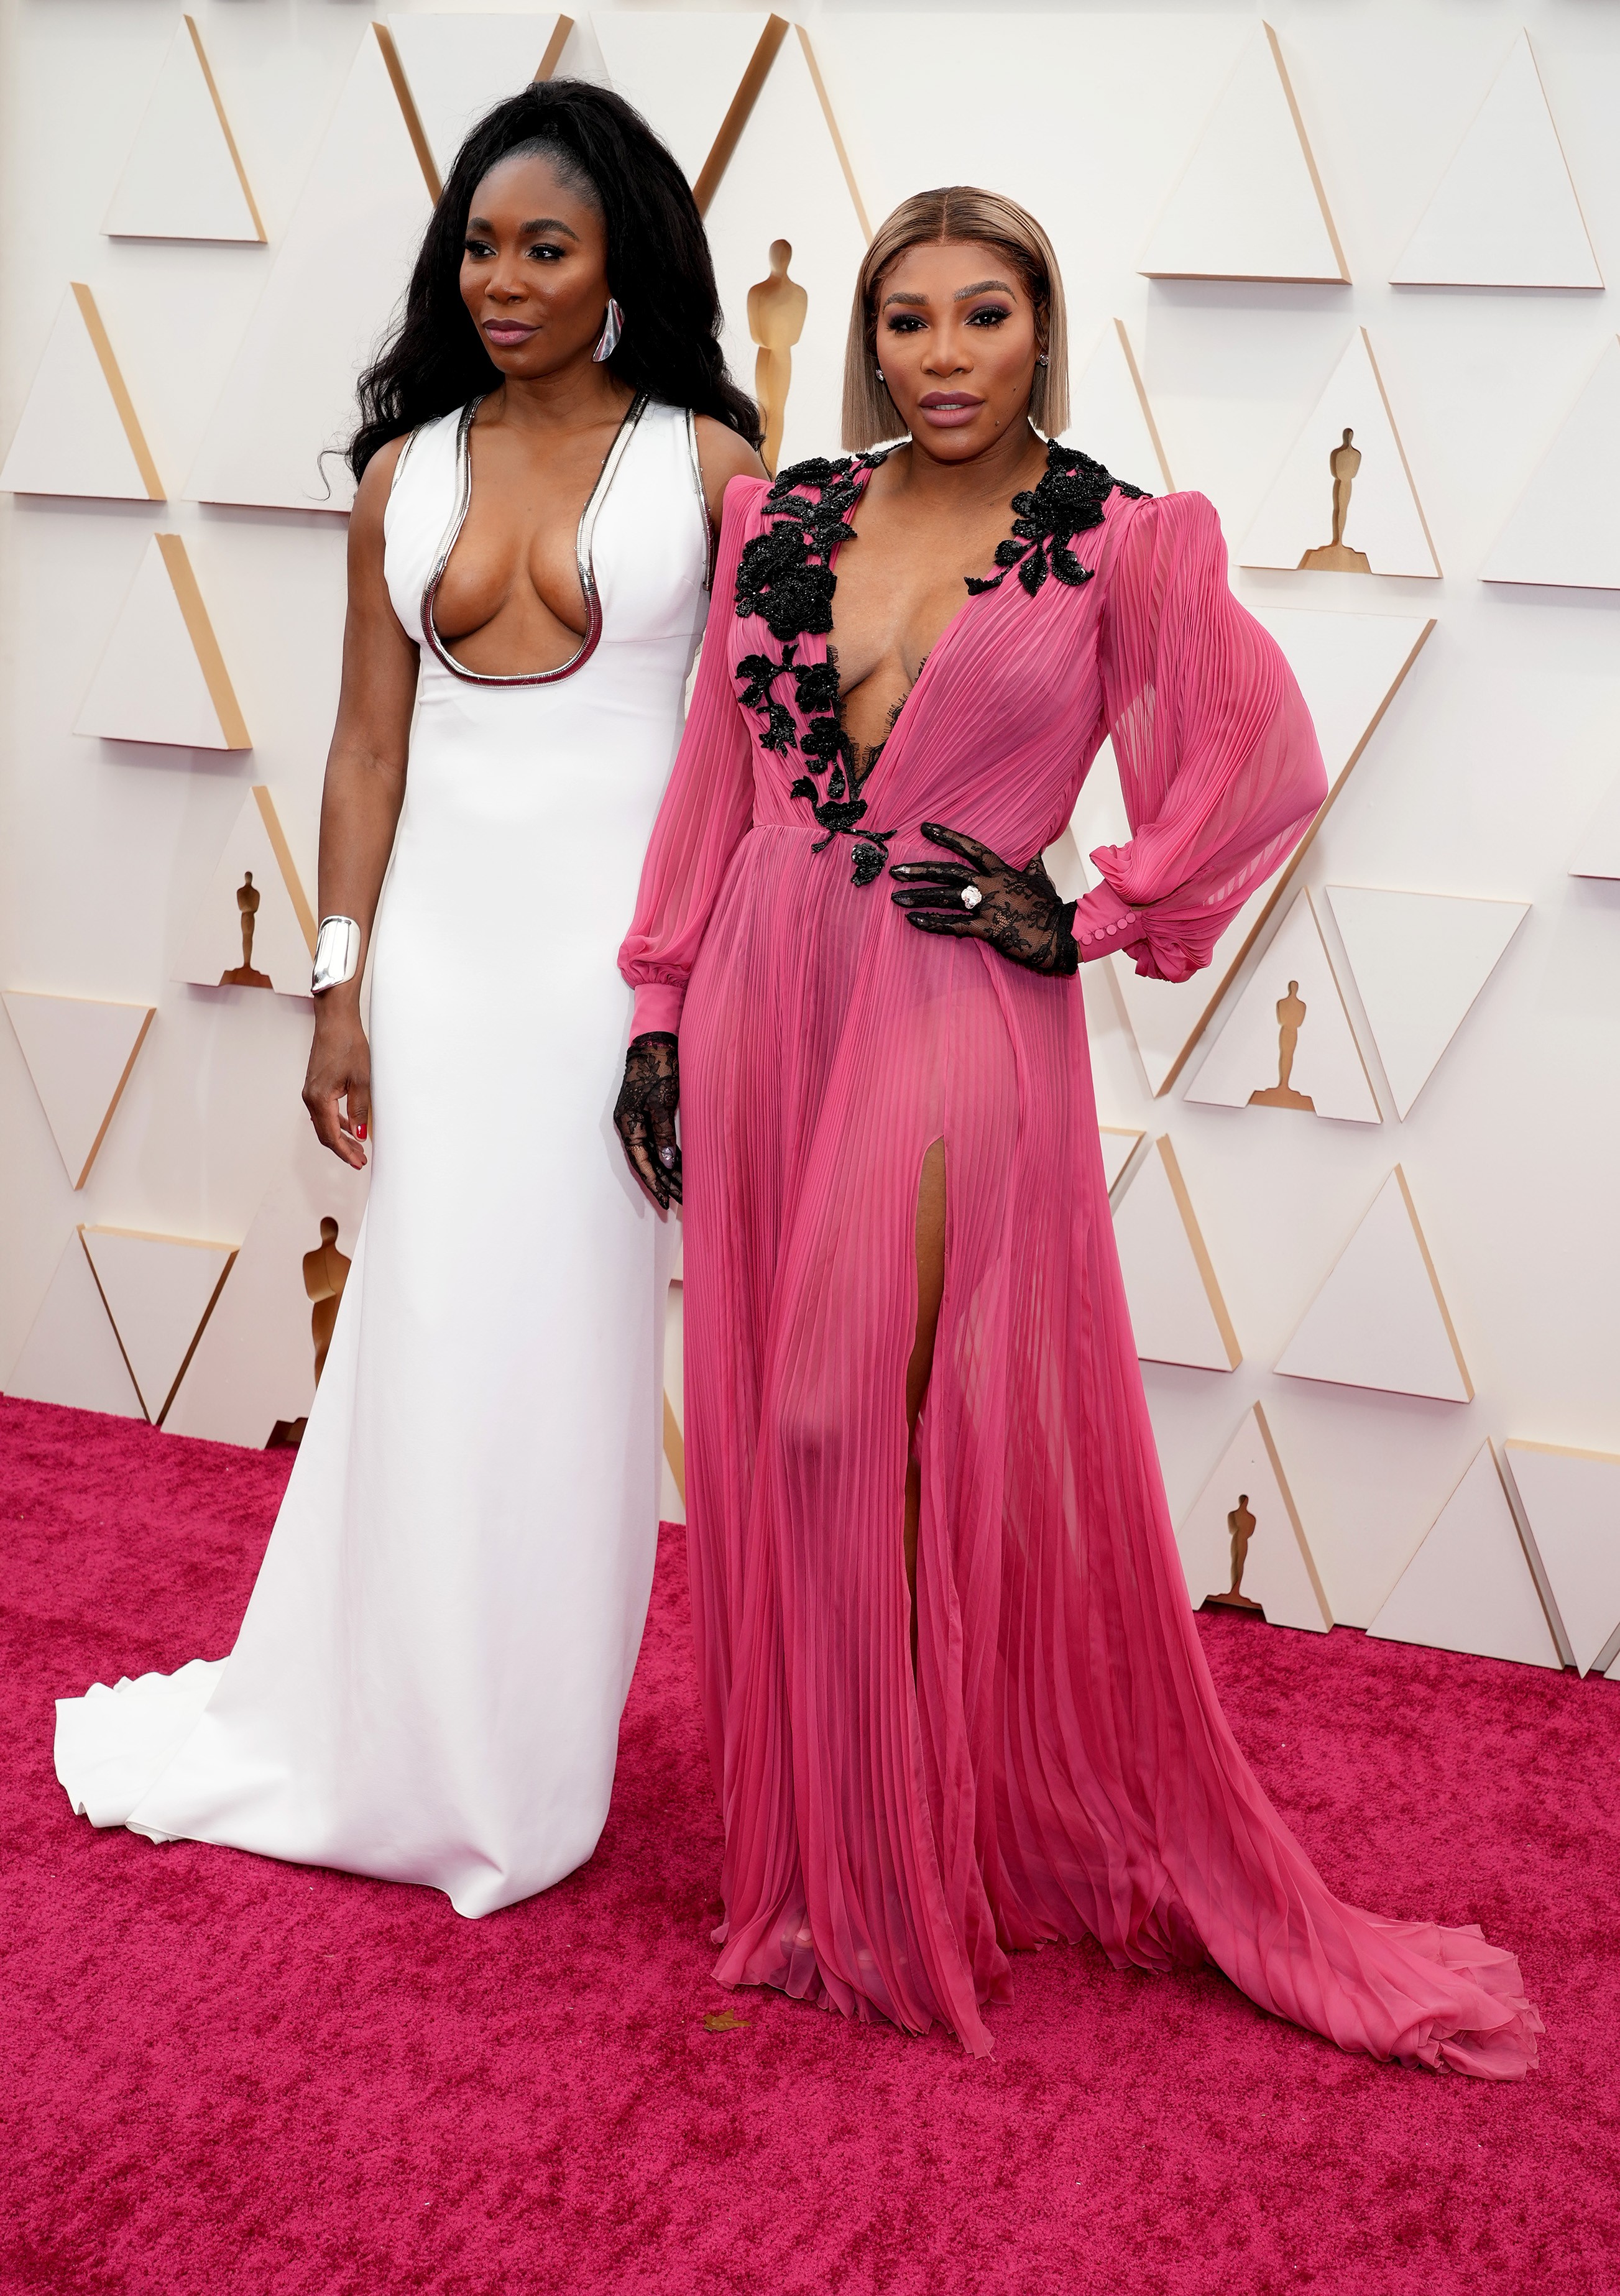 HOLLYWOOD, CALIFORNIA - MARCH 27: (L-R) Venus Williams and Serena Williams attend the 94th Annual Academy Awards at Hollywood and Highland on March 27, 2022 in Hollywood, California. (Photo by Kevin Mazur/WireImage) (Foto: WireImage,)